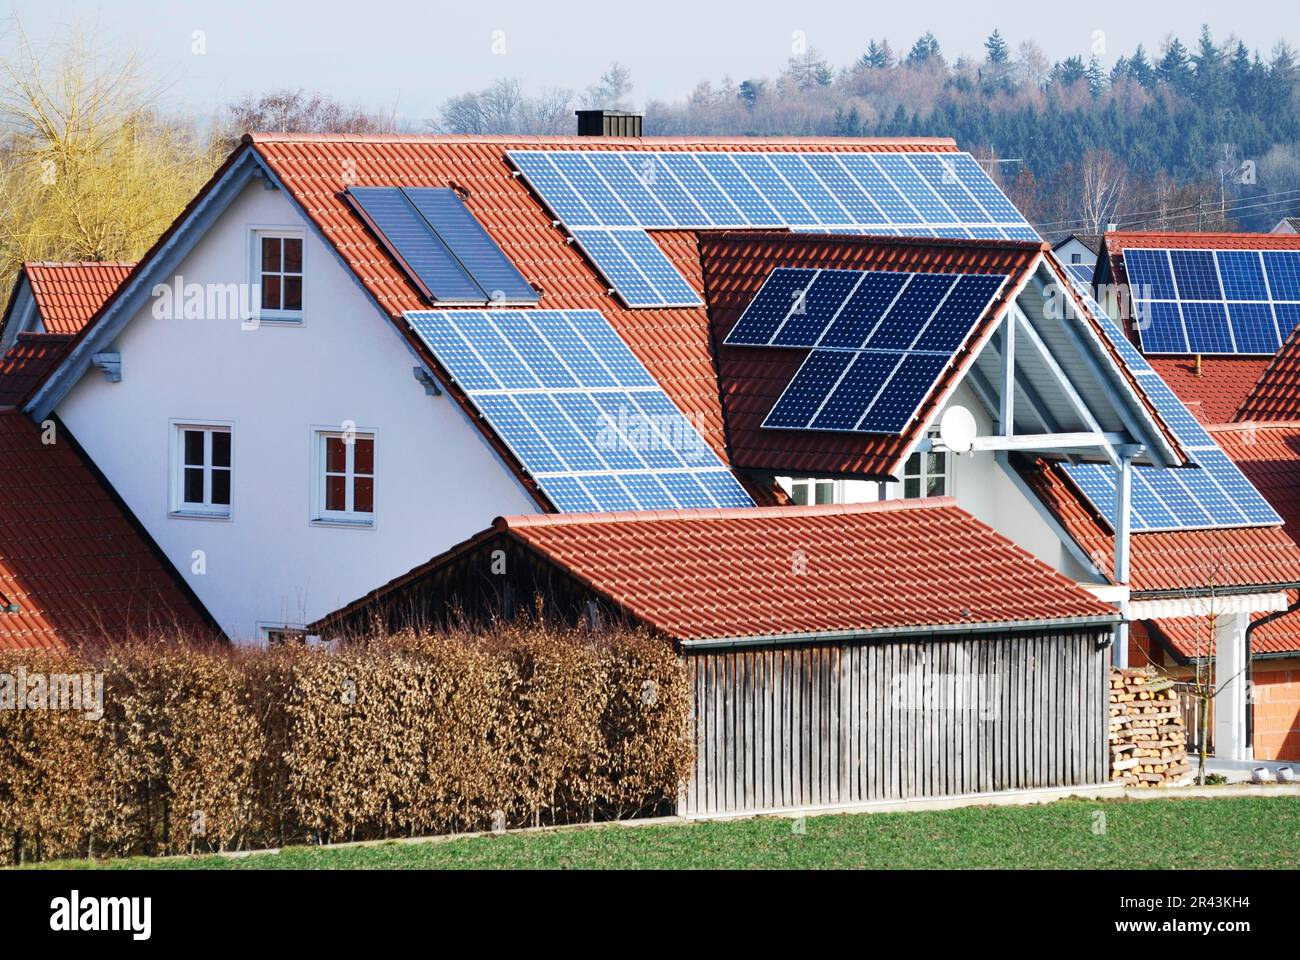 Photovoltaic, Electricity generation with solar panels on the roof Stock Photo